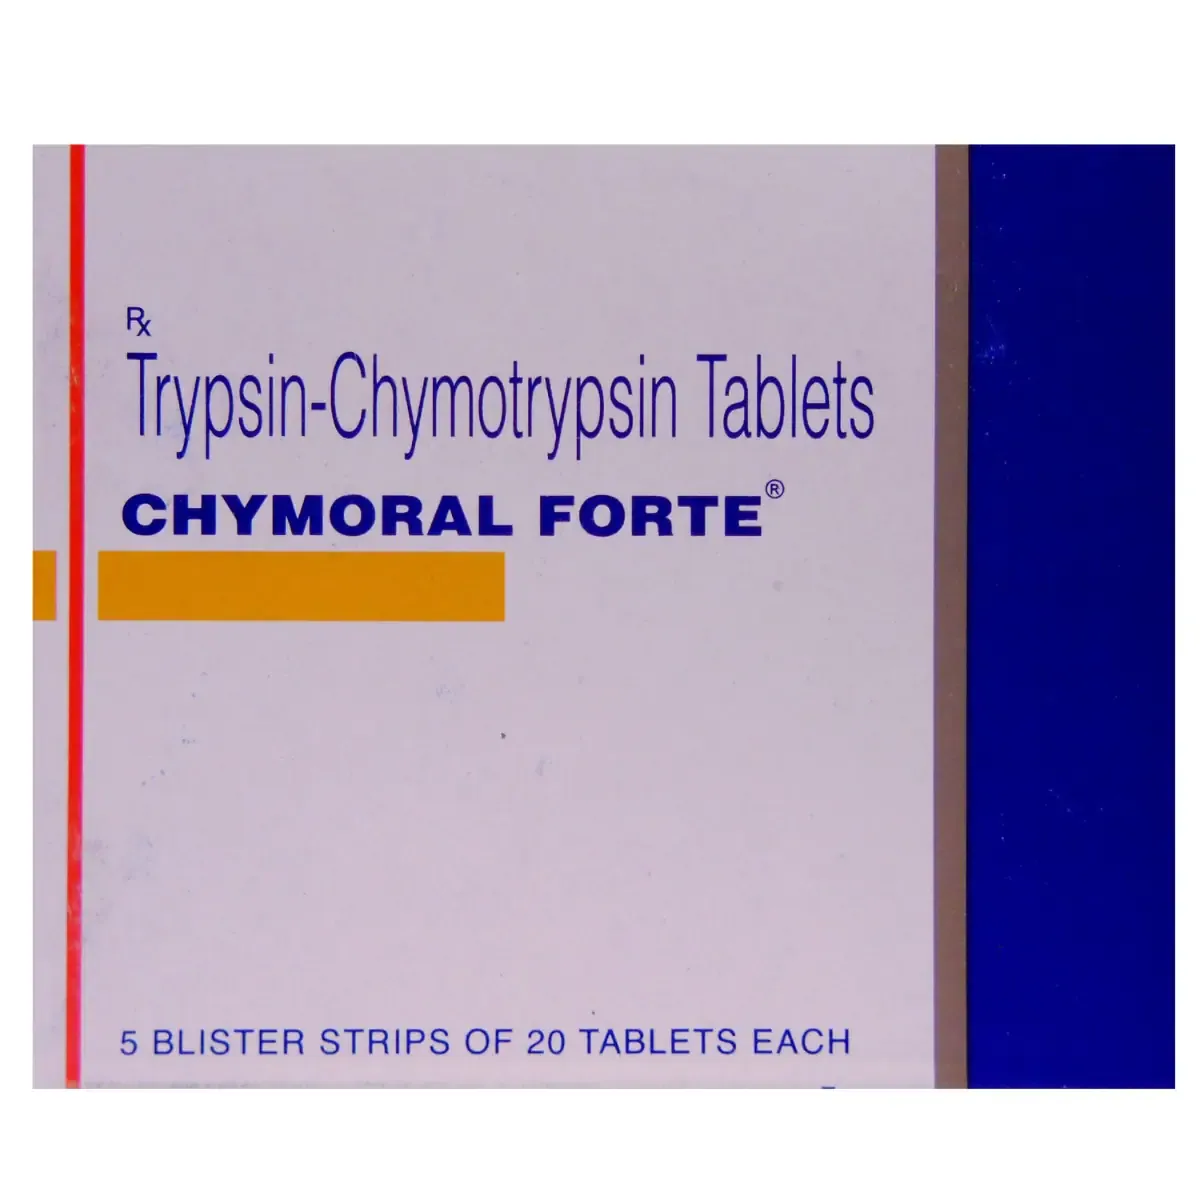 Chymoral Forte Tablet: Uses, Benefits, Dosage, Side Effects and Concerns